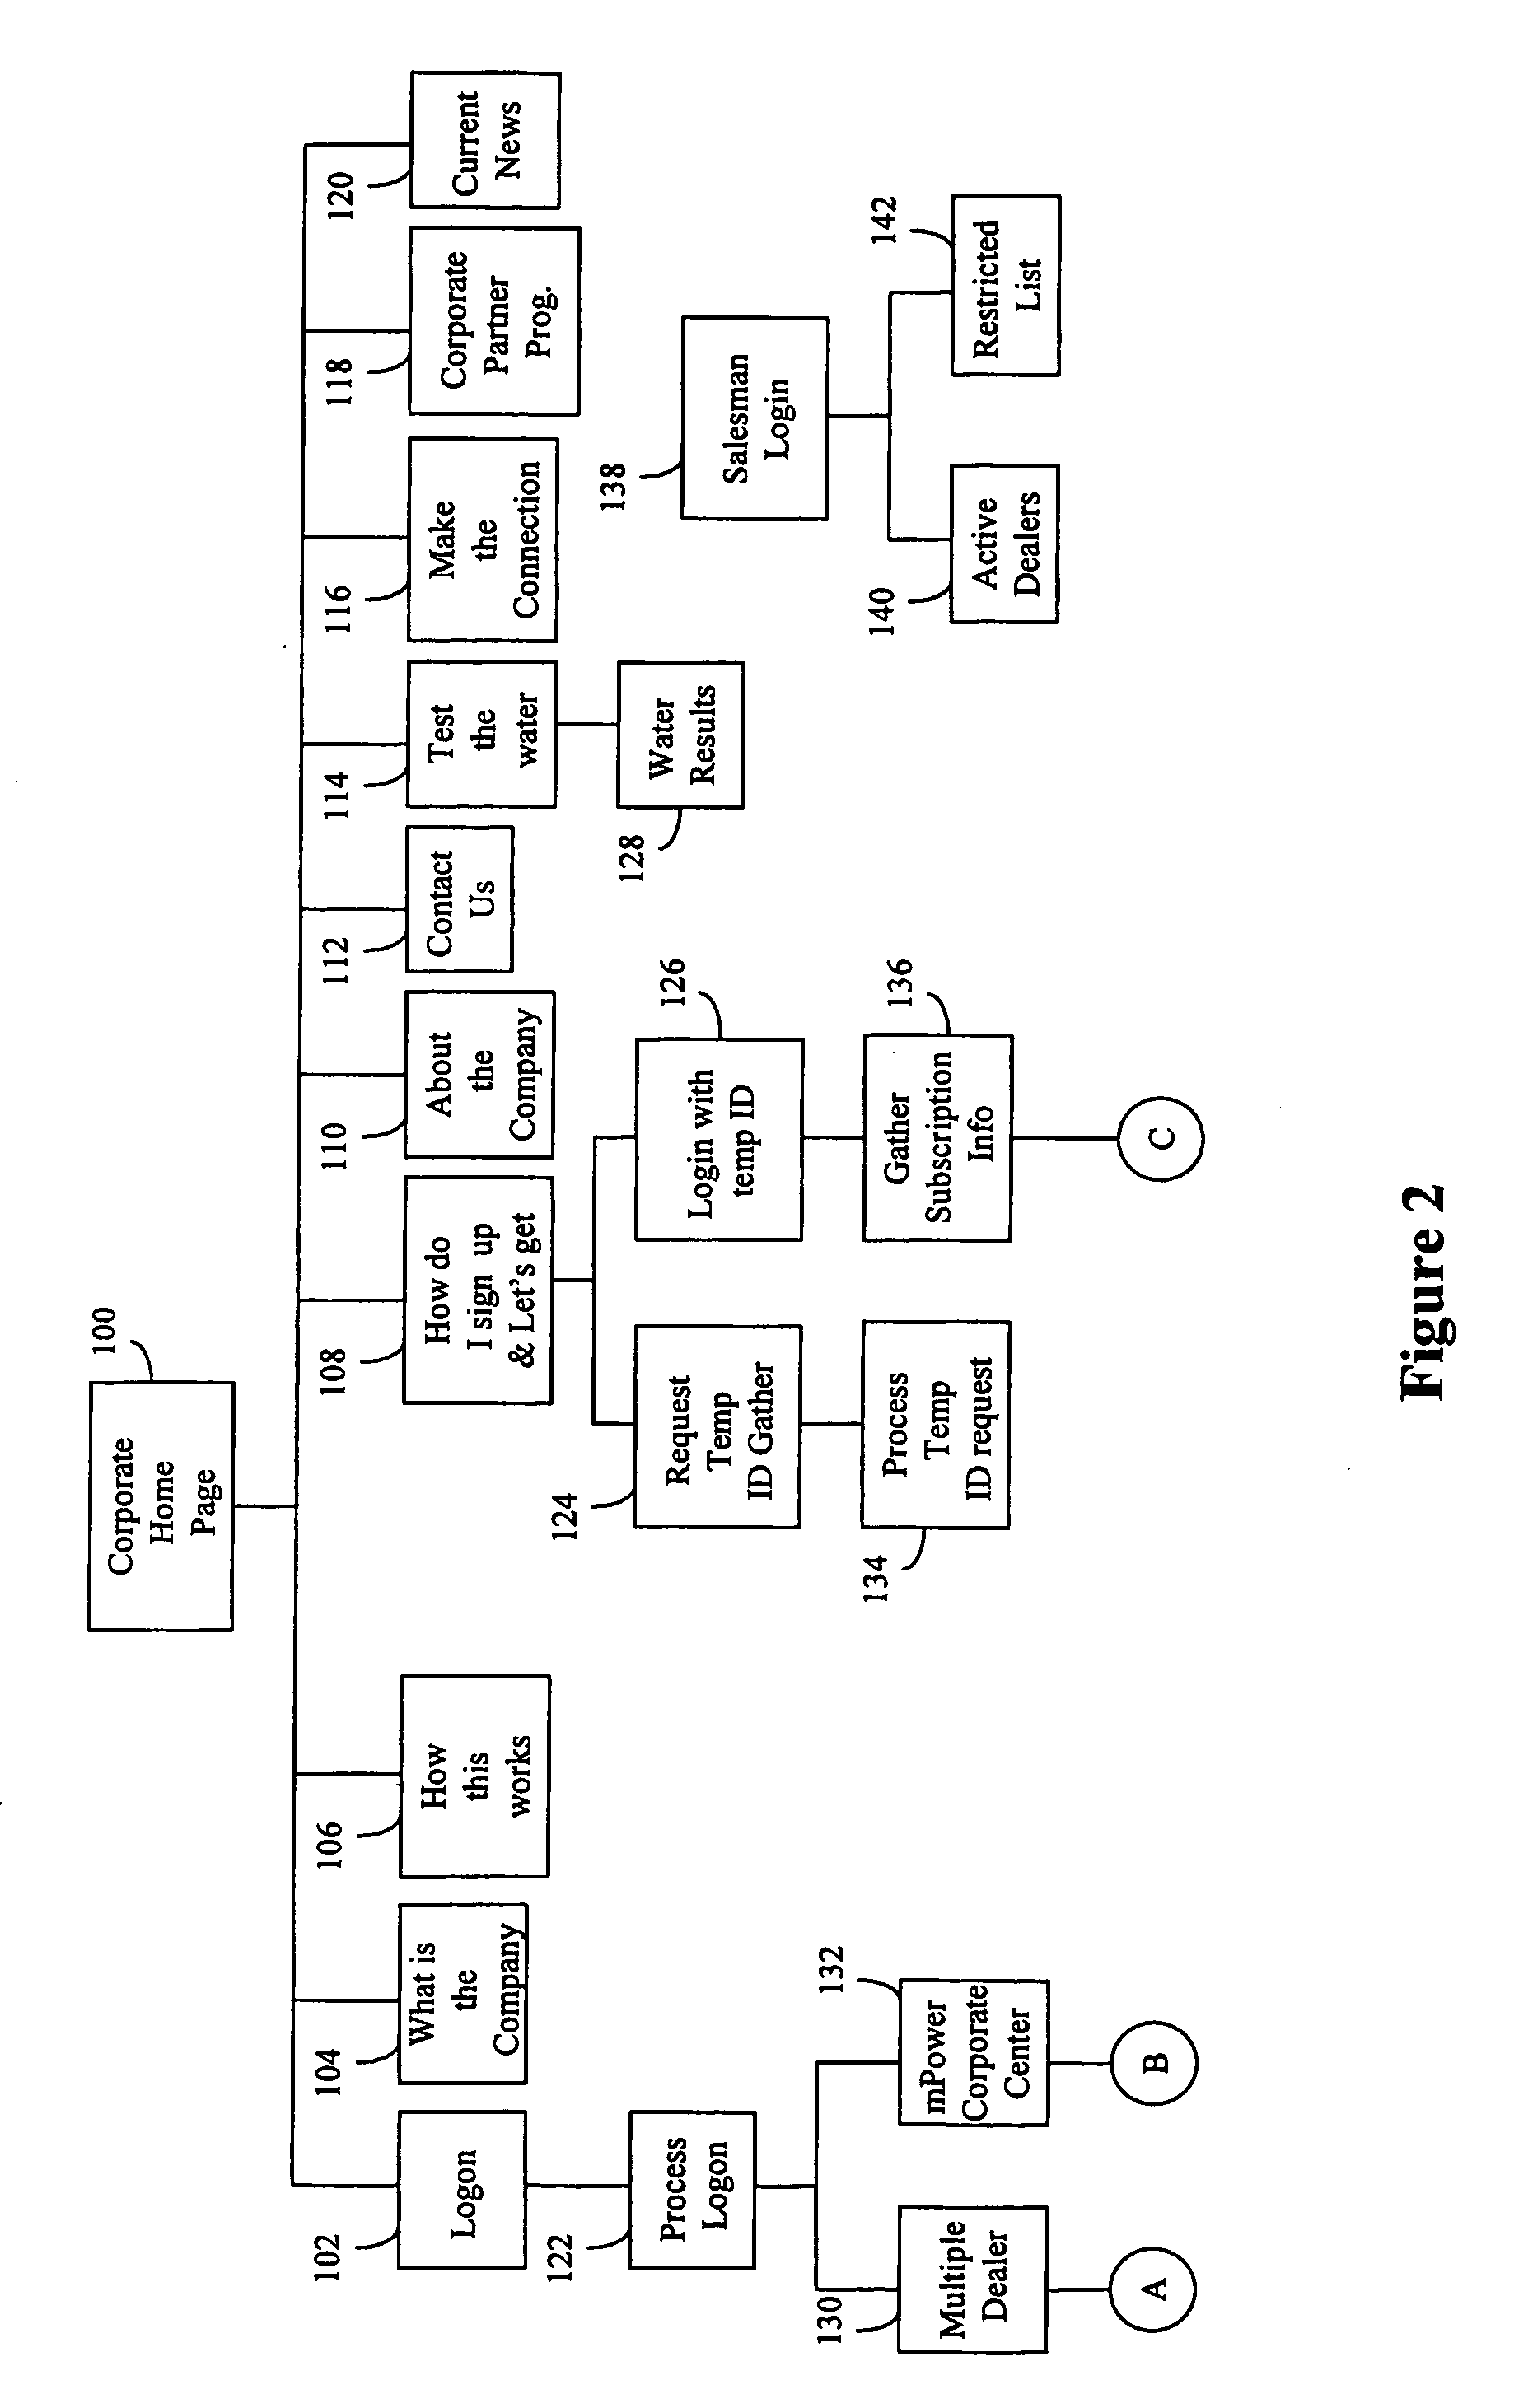 System and method for managing business performance